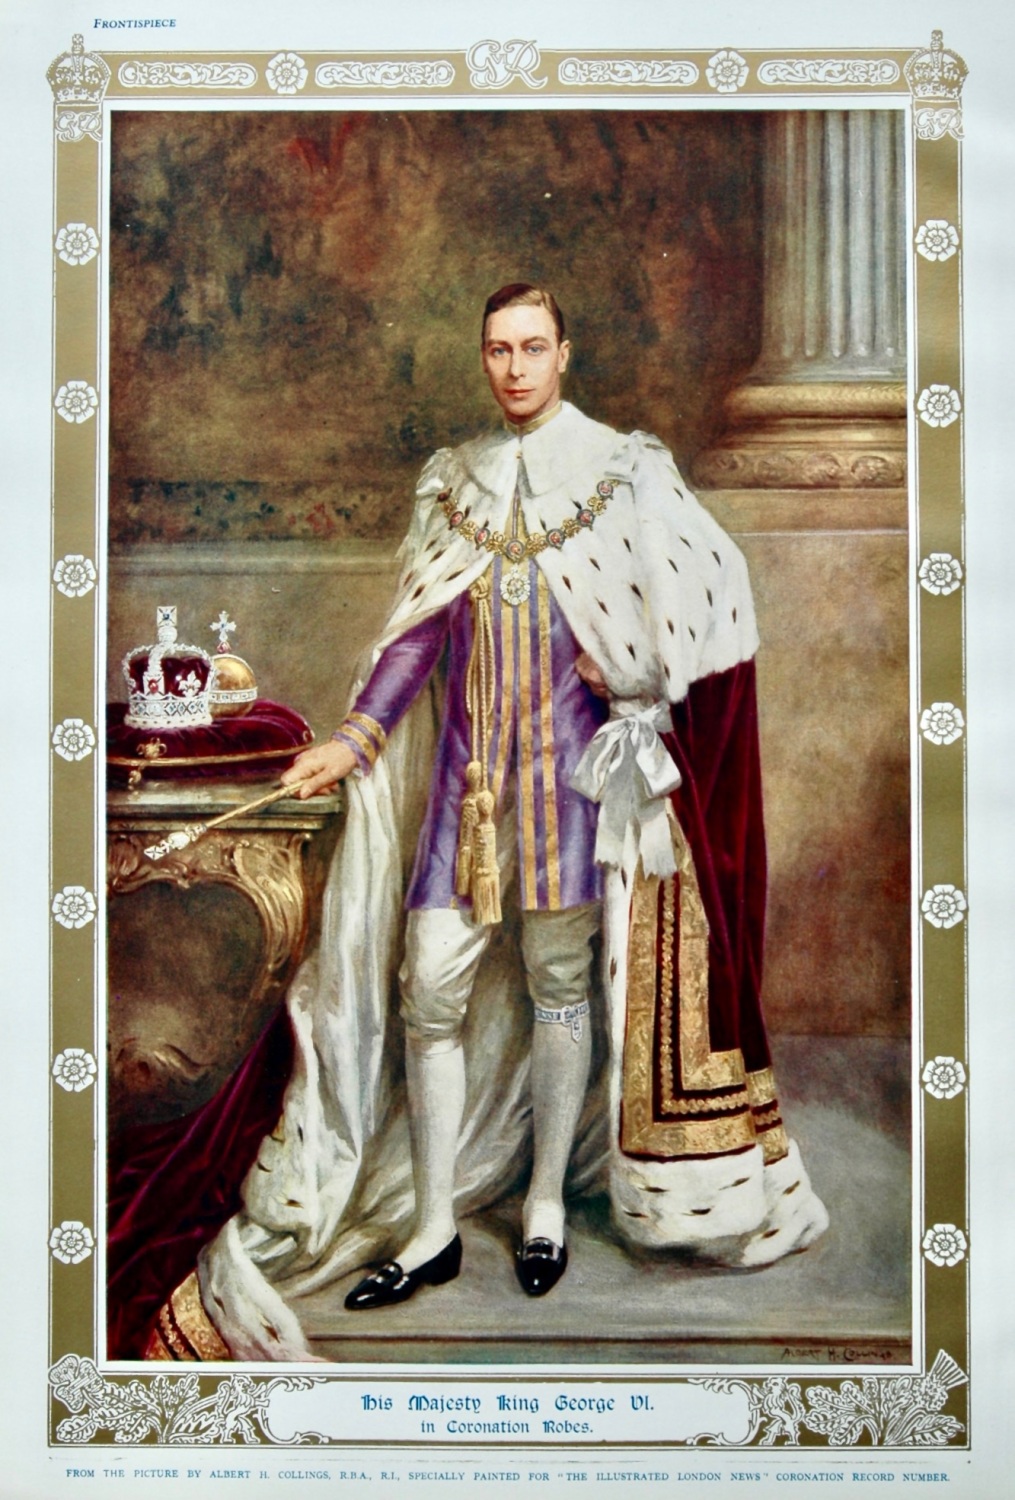 His Majesty King George VI. in Coronation Robes.  1937.